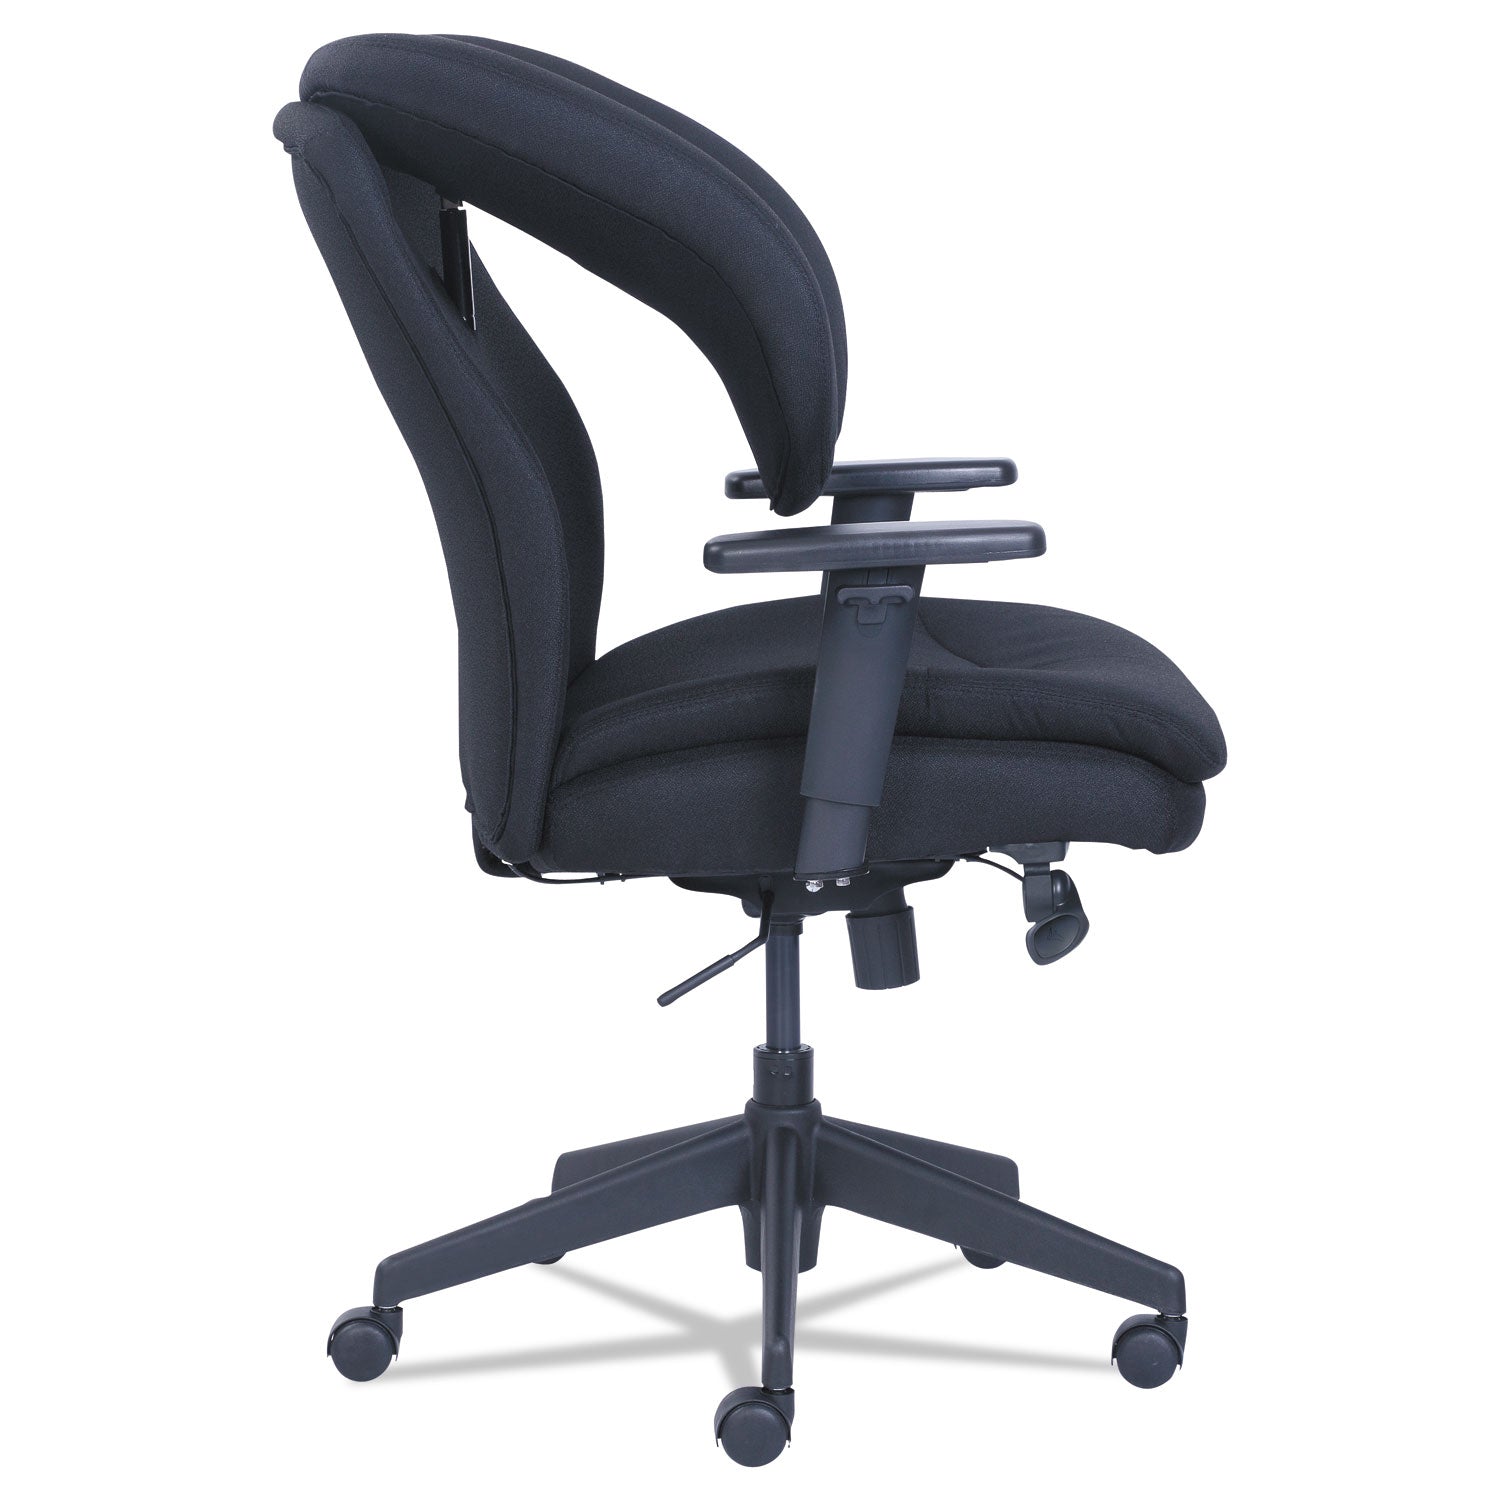 cosset-ergonomic-task-chair-supports-up-to-275-lb-195-to-225-seat-height-black_srj48967a - 2